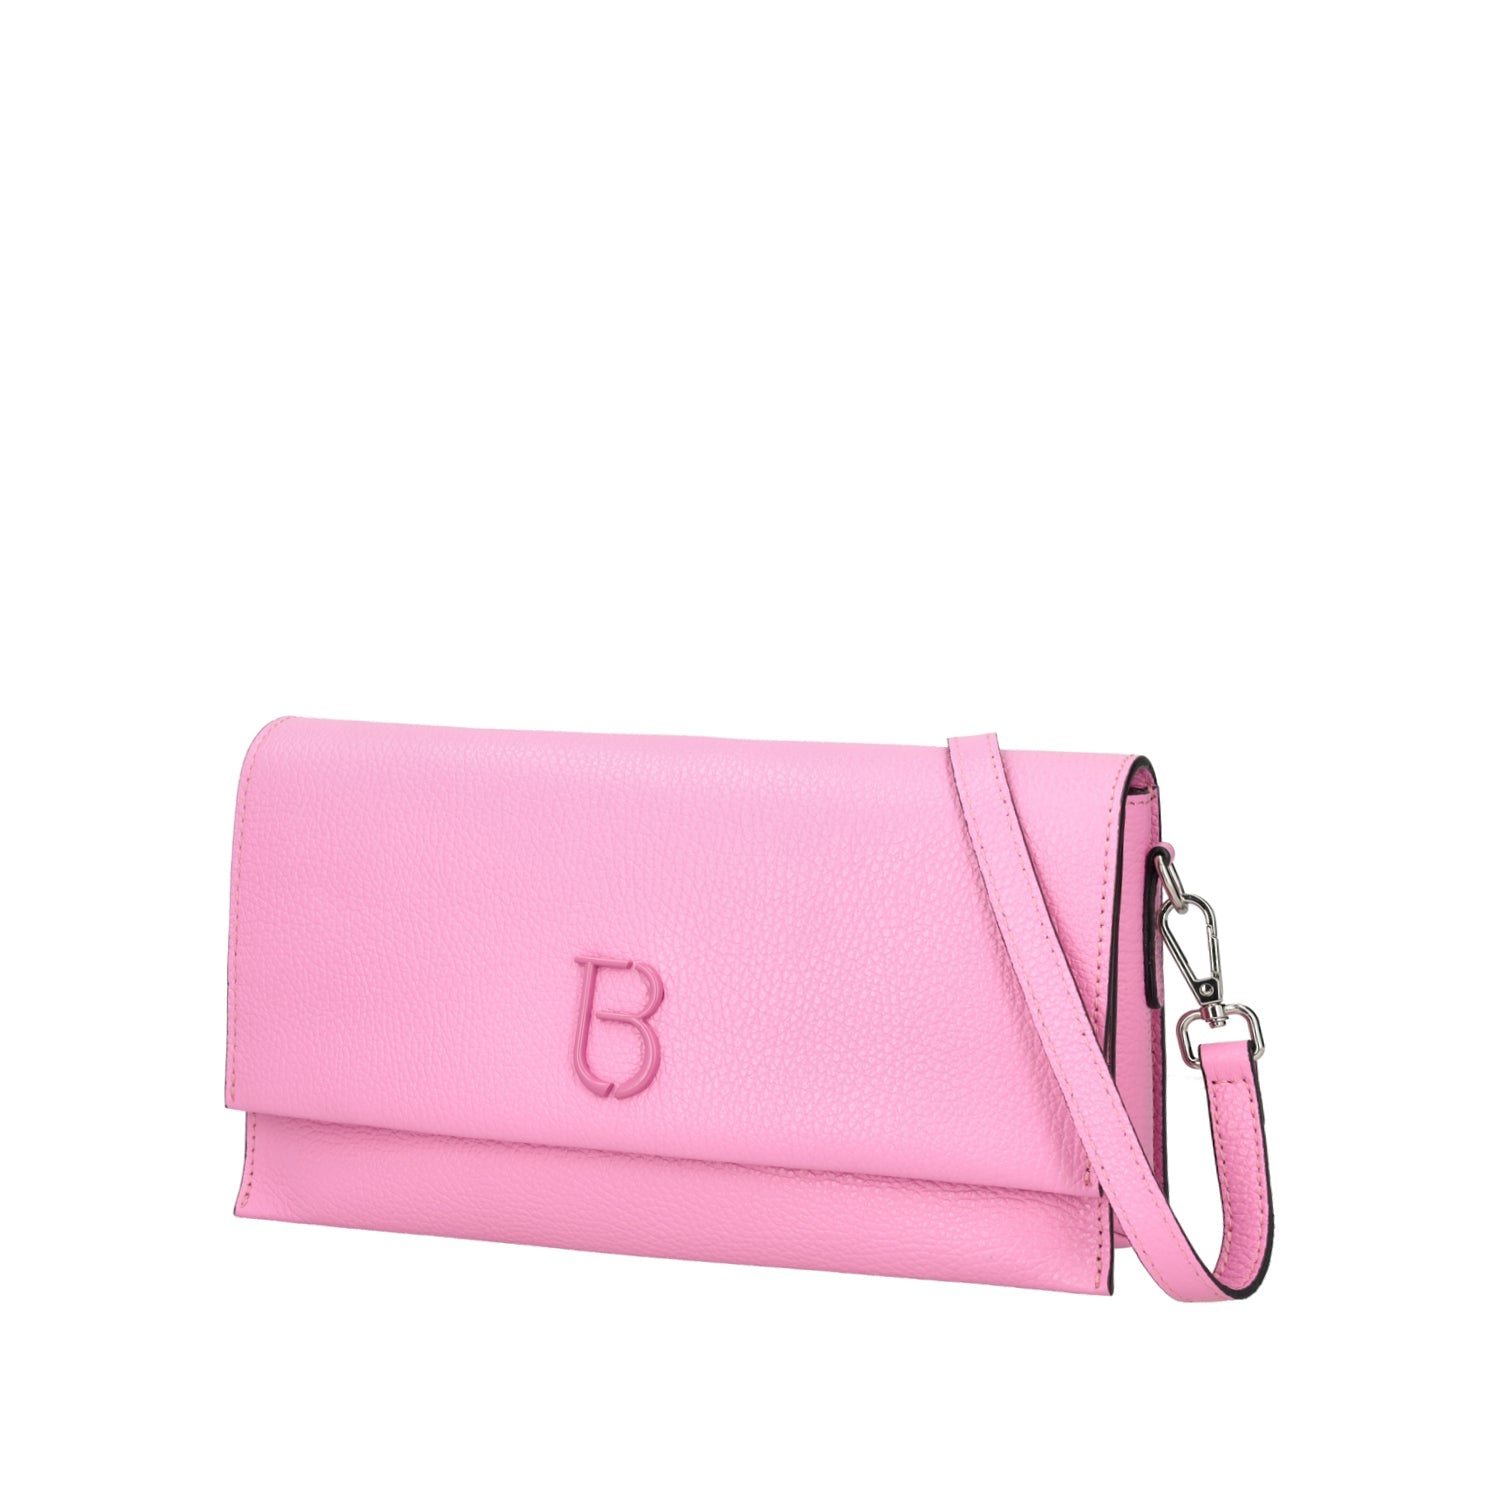 PINK NARCISO POCHETTE IN LEATHER